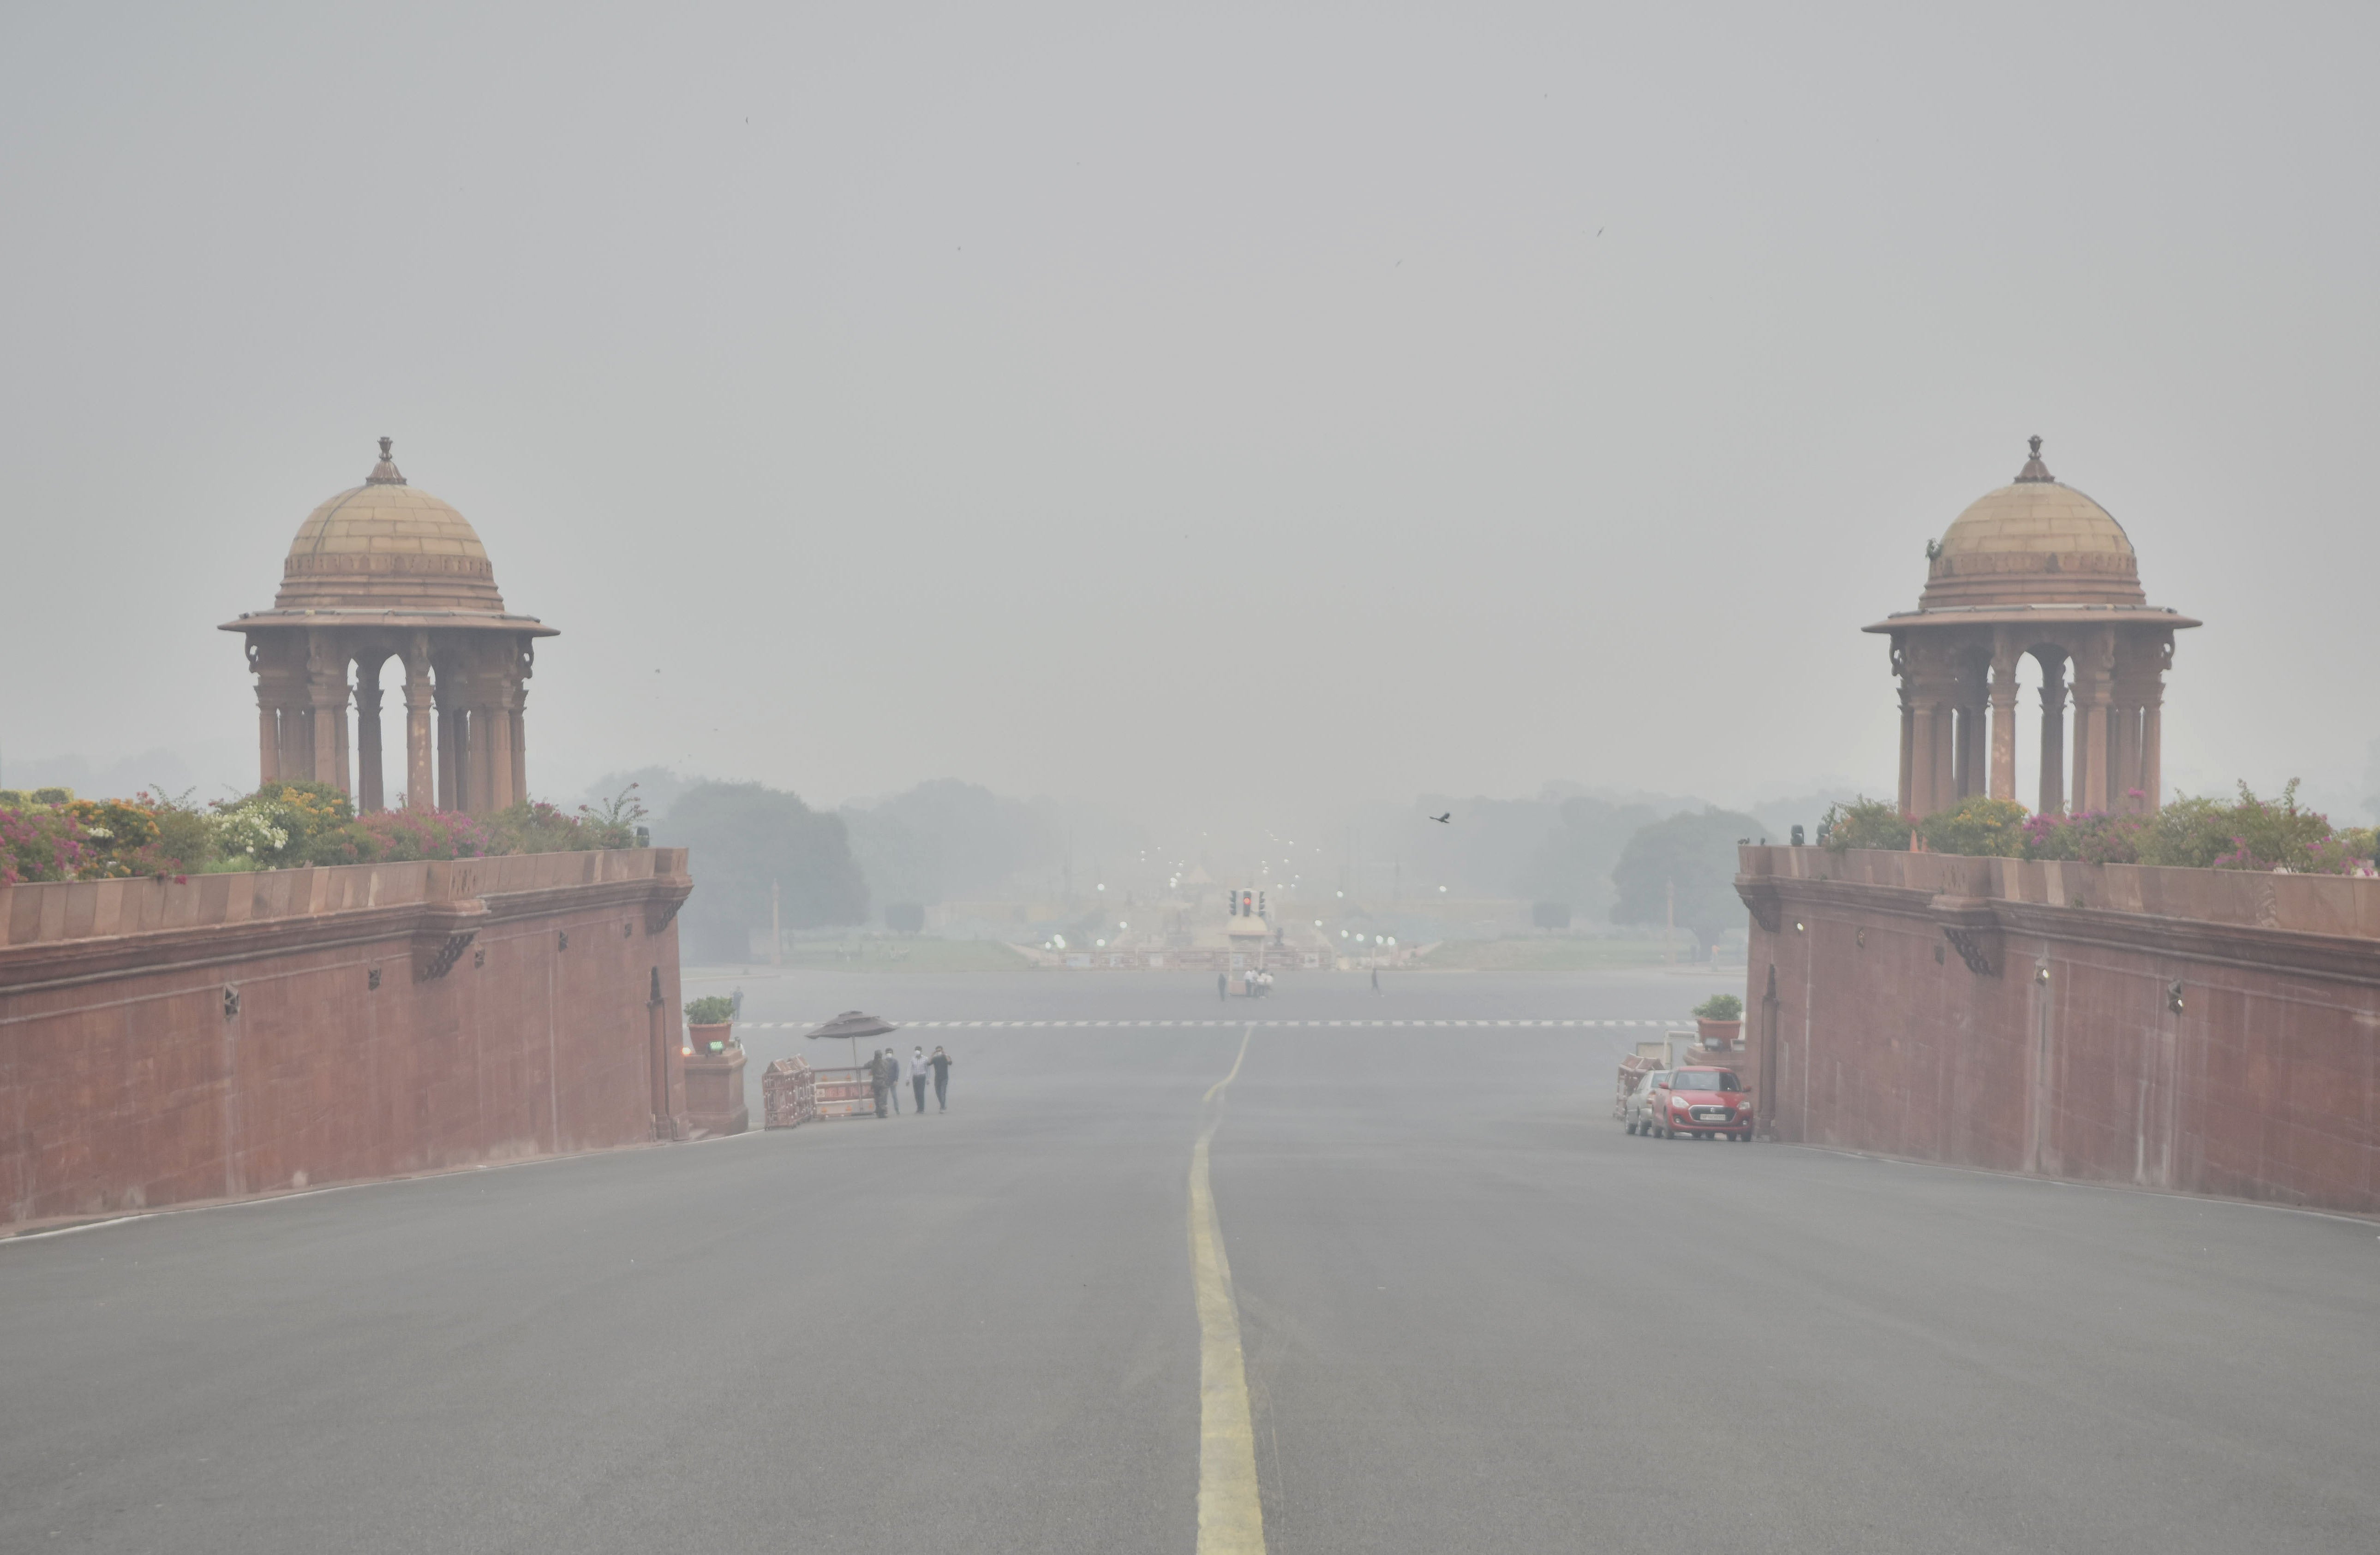 File: A view of the Rajpath in central Delhi amid smoggy conditions ahead of the Hindu festival of Diwali